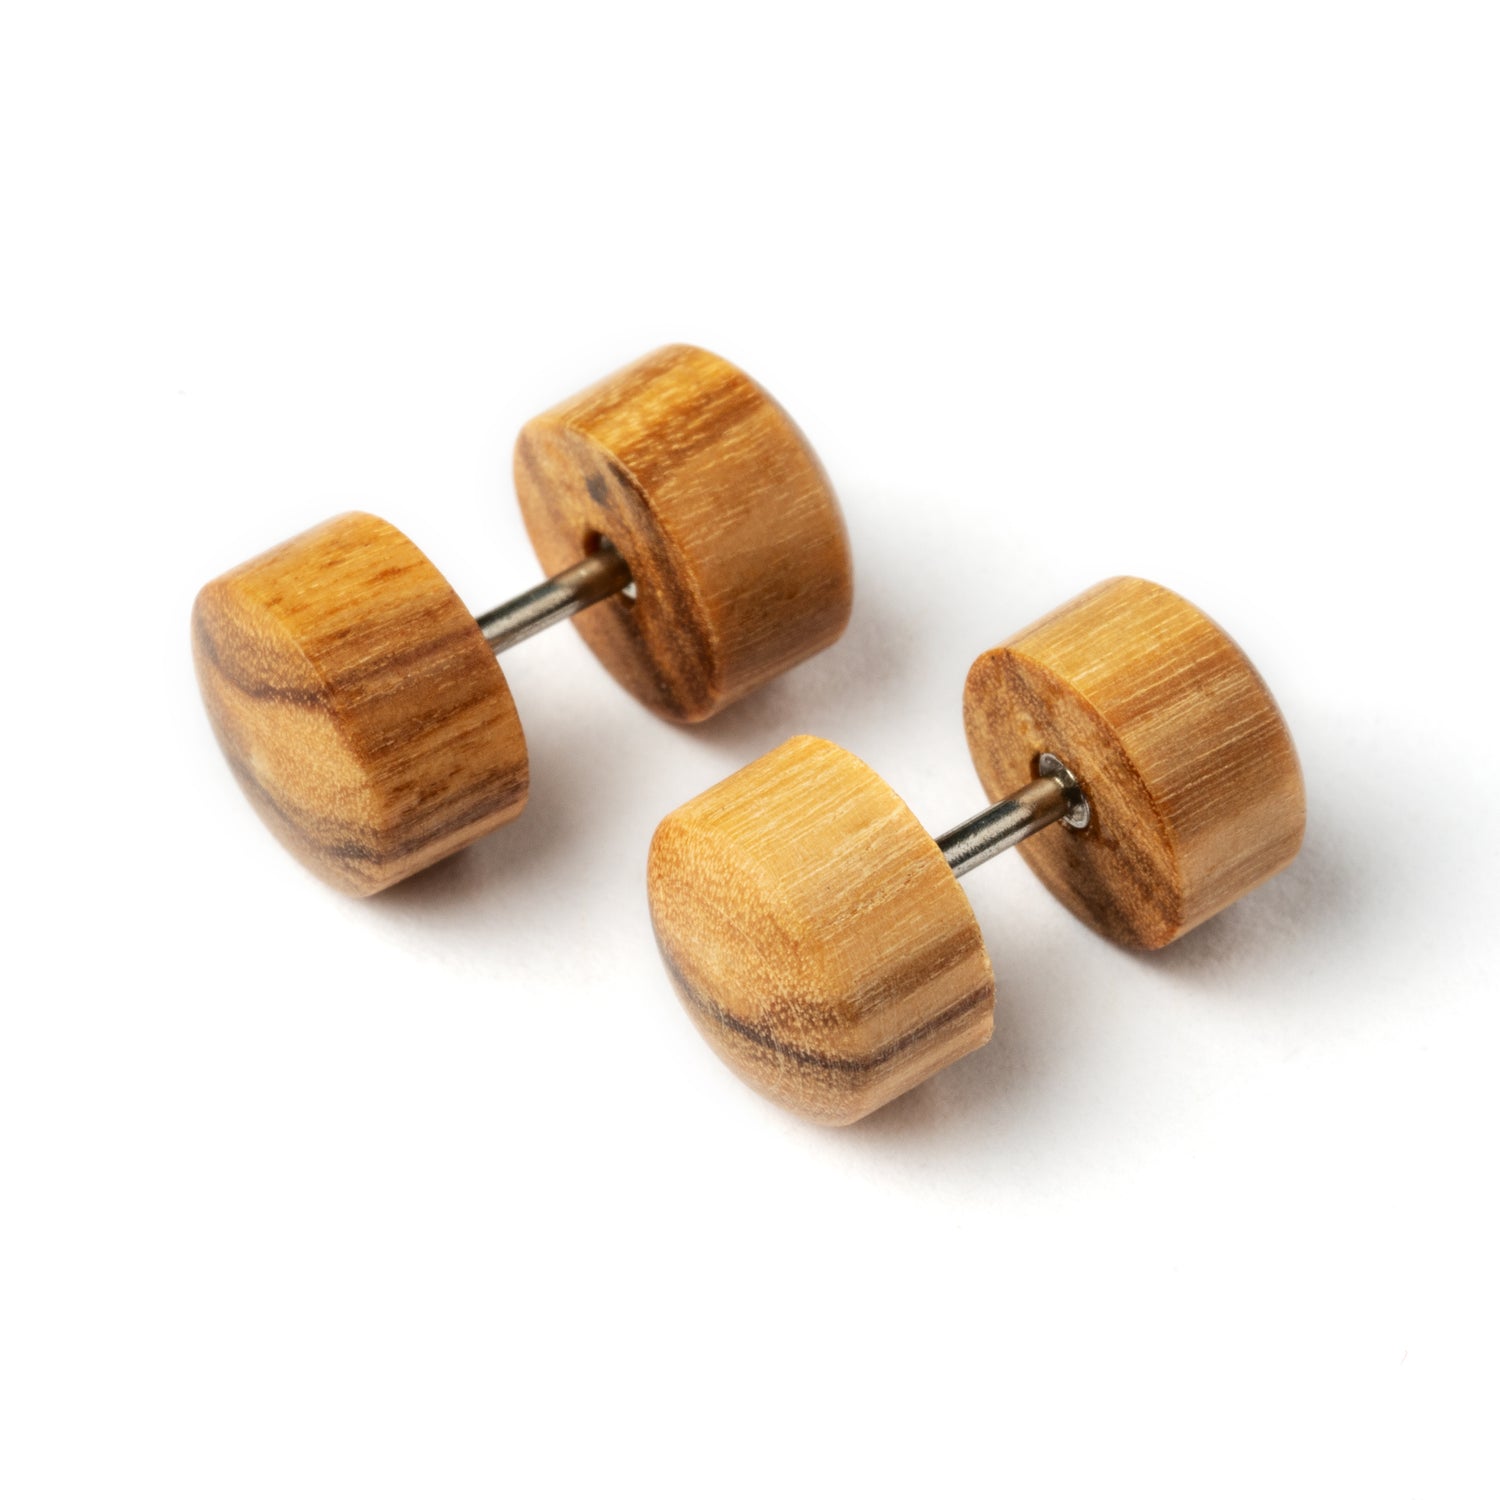 Pair of light wood fake plugs earrings right side view